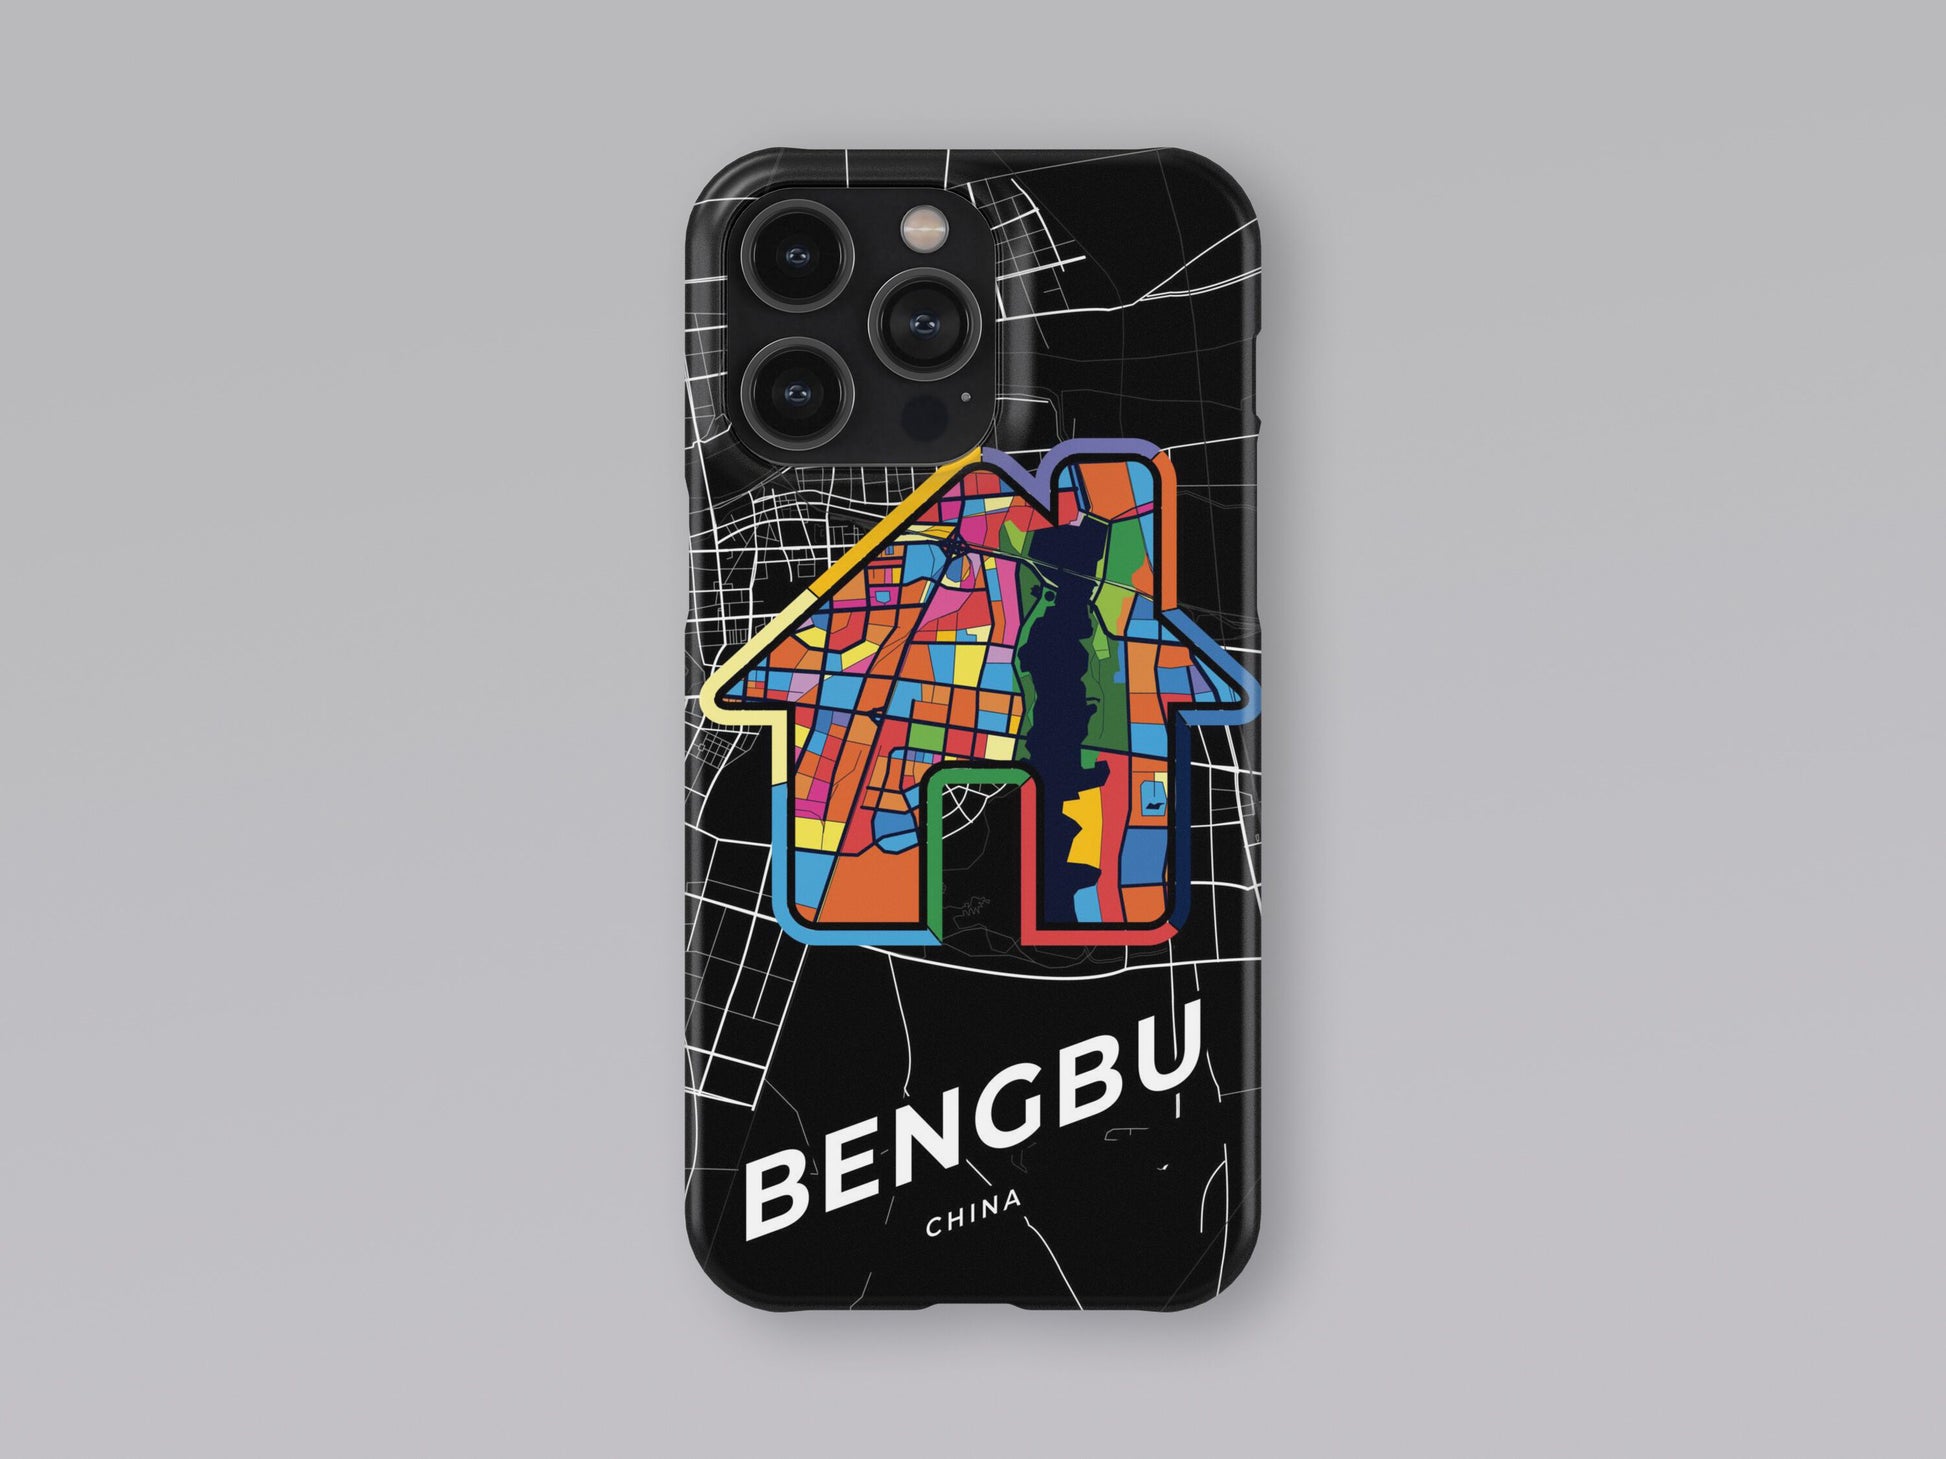 Bengbu China slim phone case with colorful icon. Birthday, wedding or housewarming gift. Couple match cases. 3